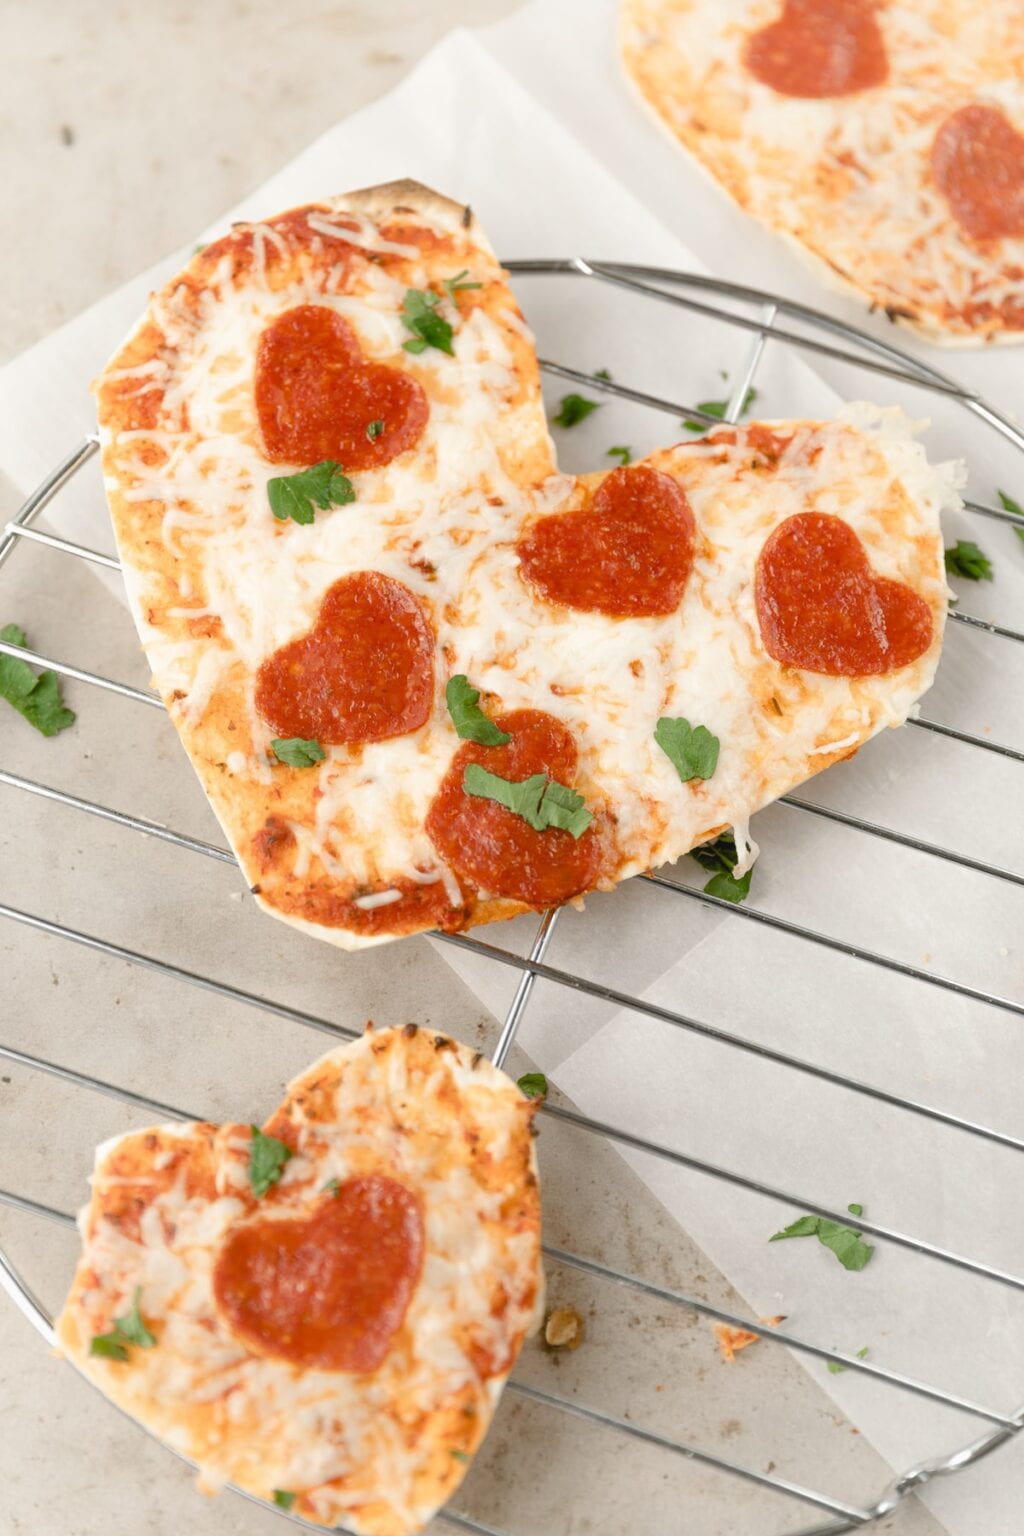 10 Minute Tortilla Pizza - Have Fun With The Kids In The Kitchen!